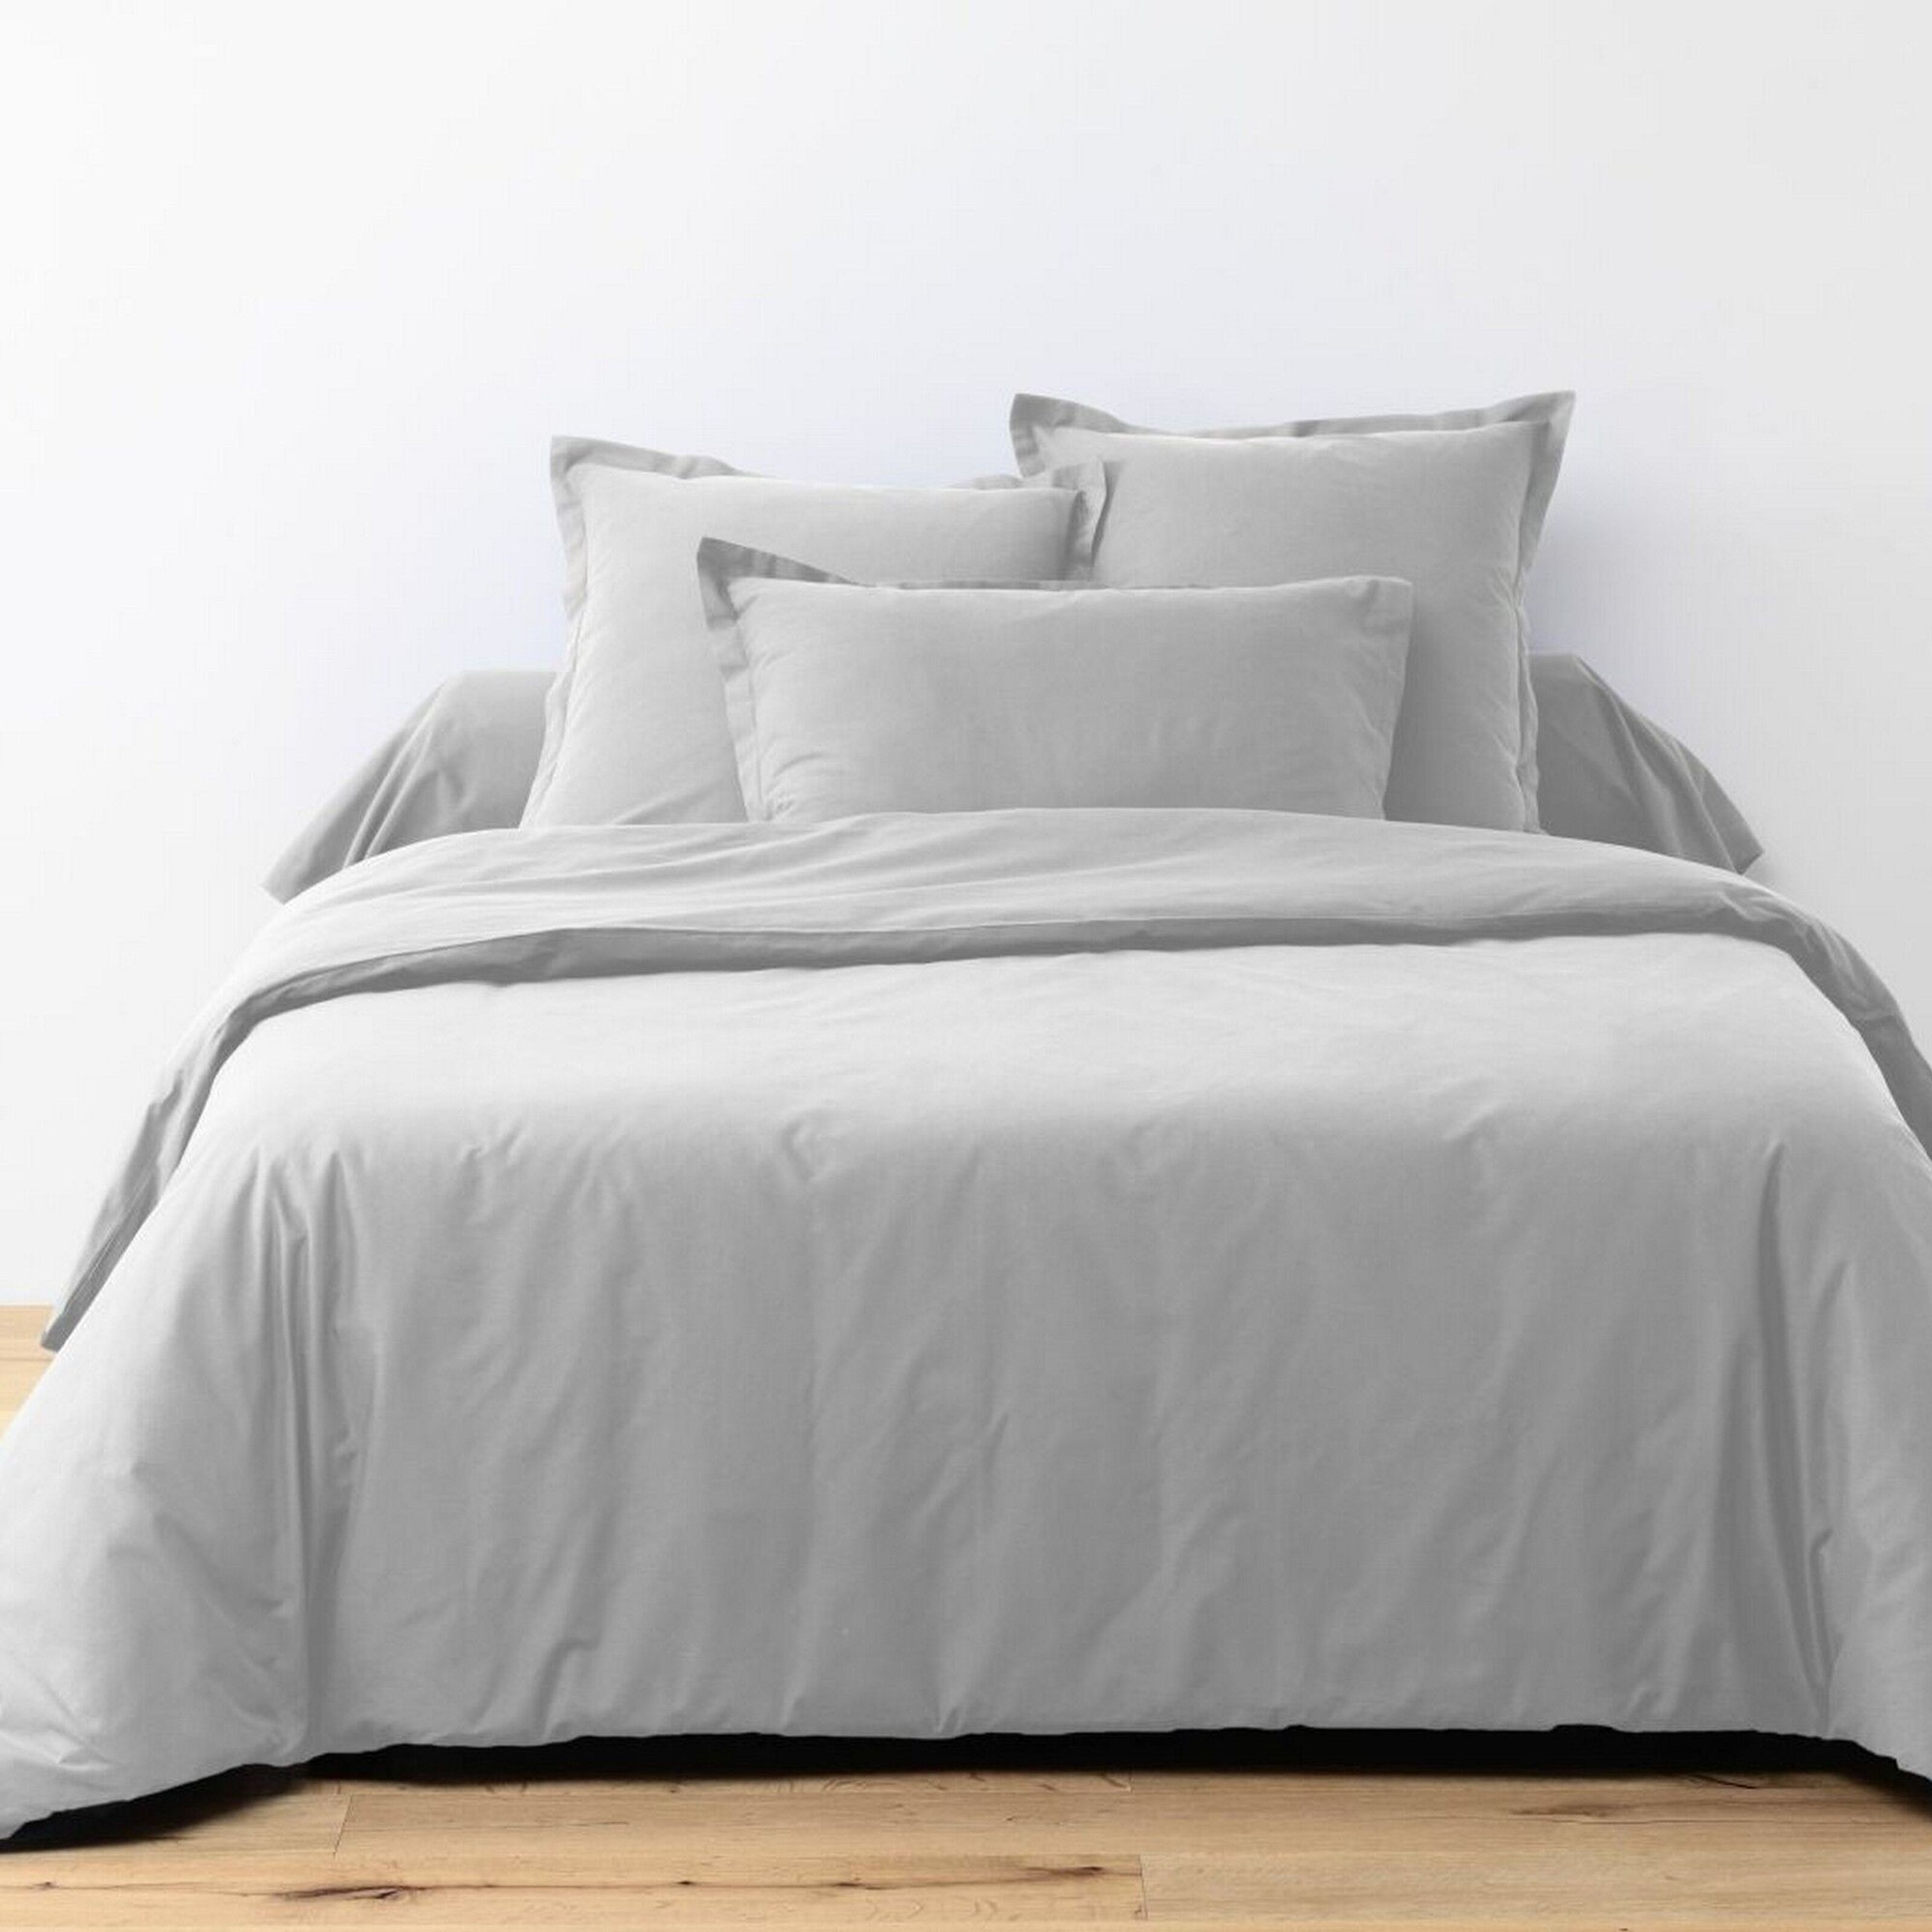 Buy wholesale Sheet set 240x300 4 pieces with Fitted sheet 140x200